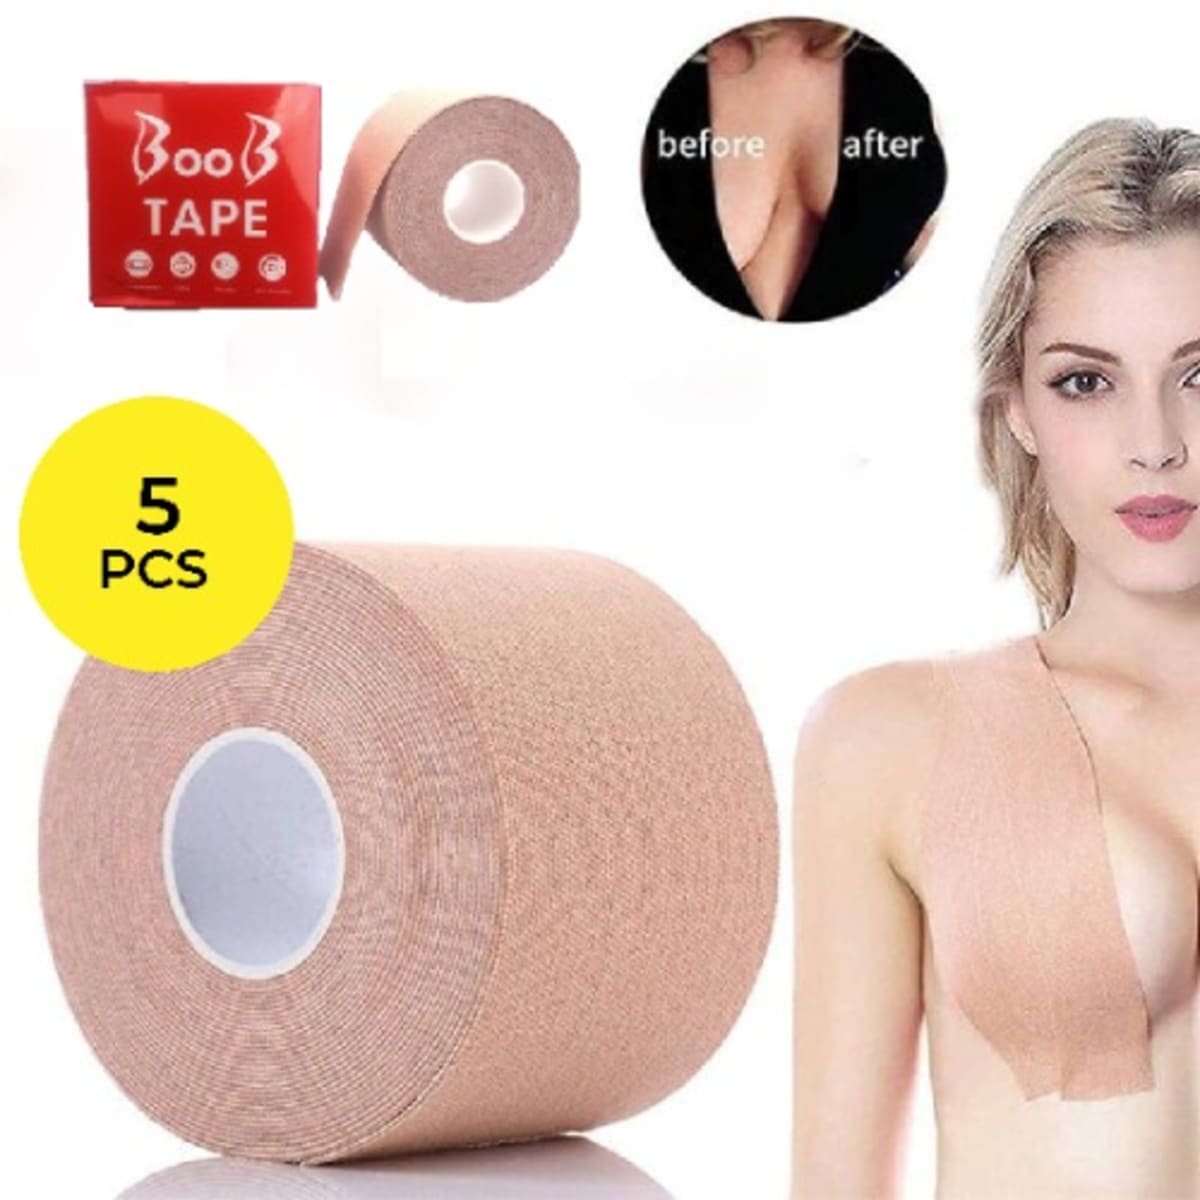 Plus Size Breathable Push Up Boobs Tape - 5pieces